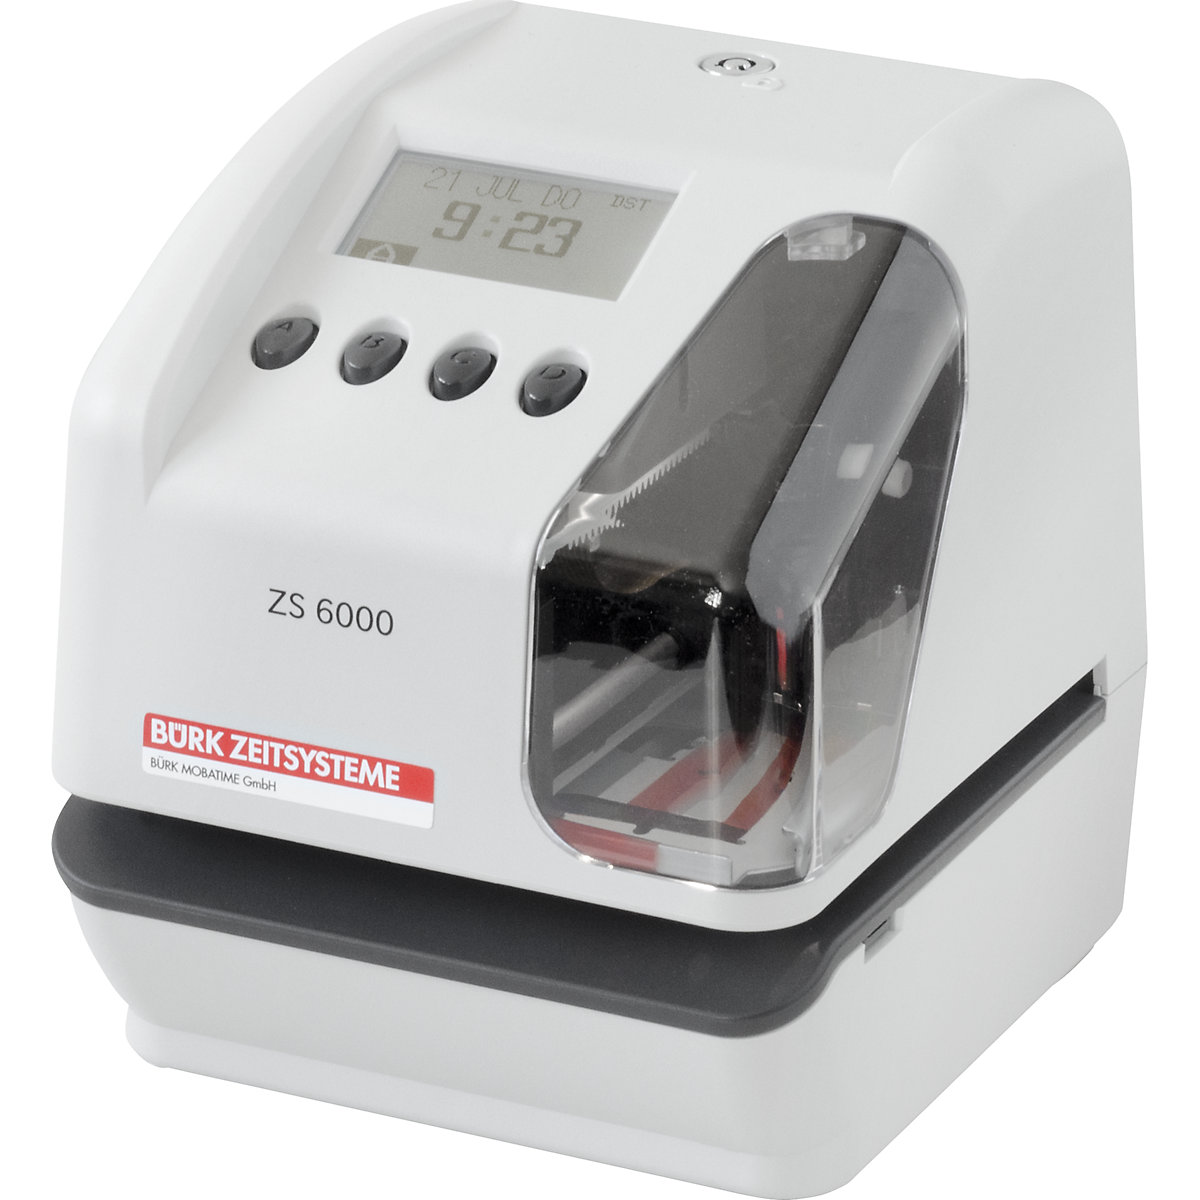 ZS 6000 time/date/text printer